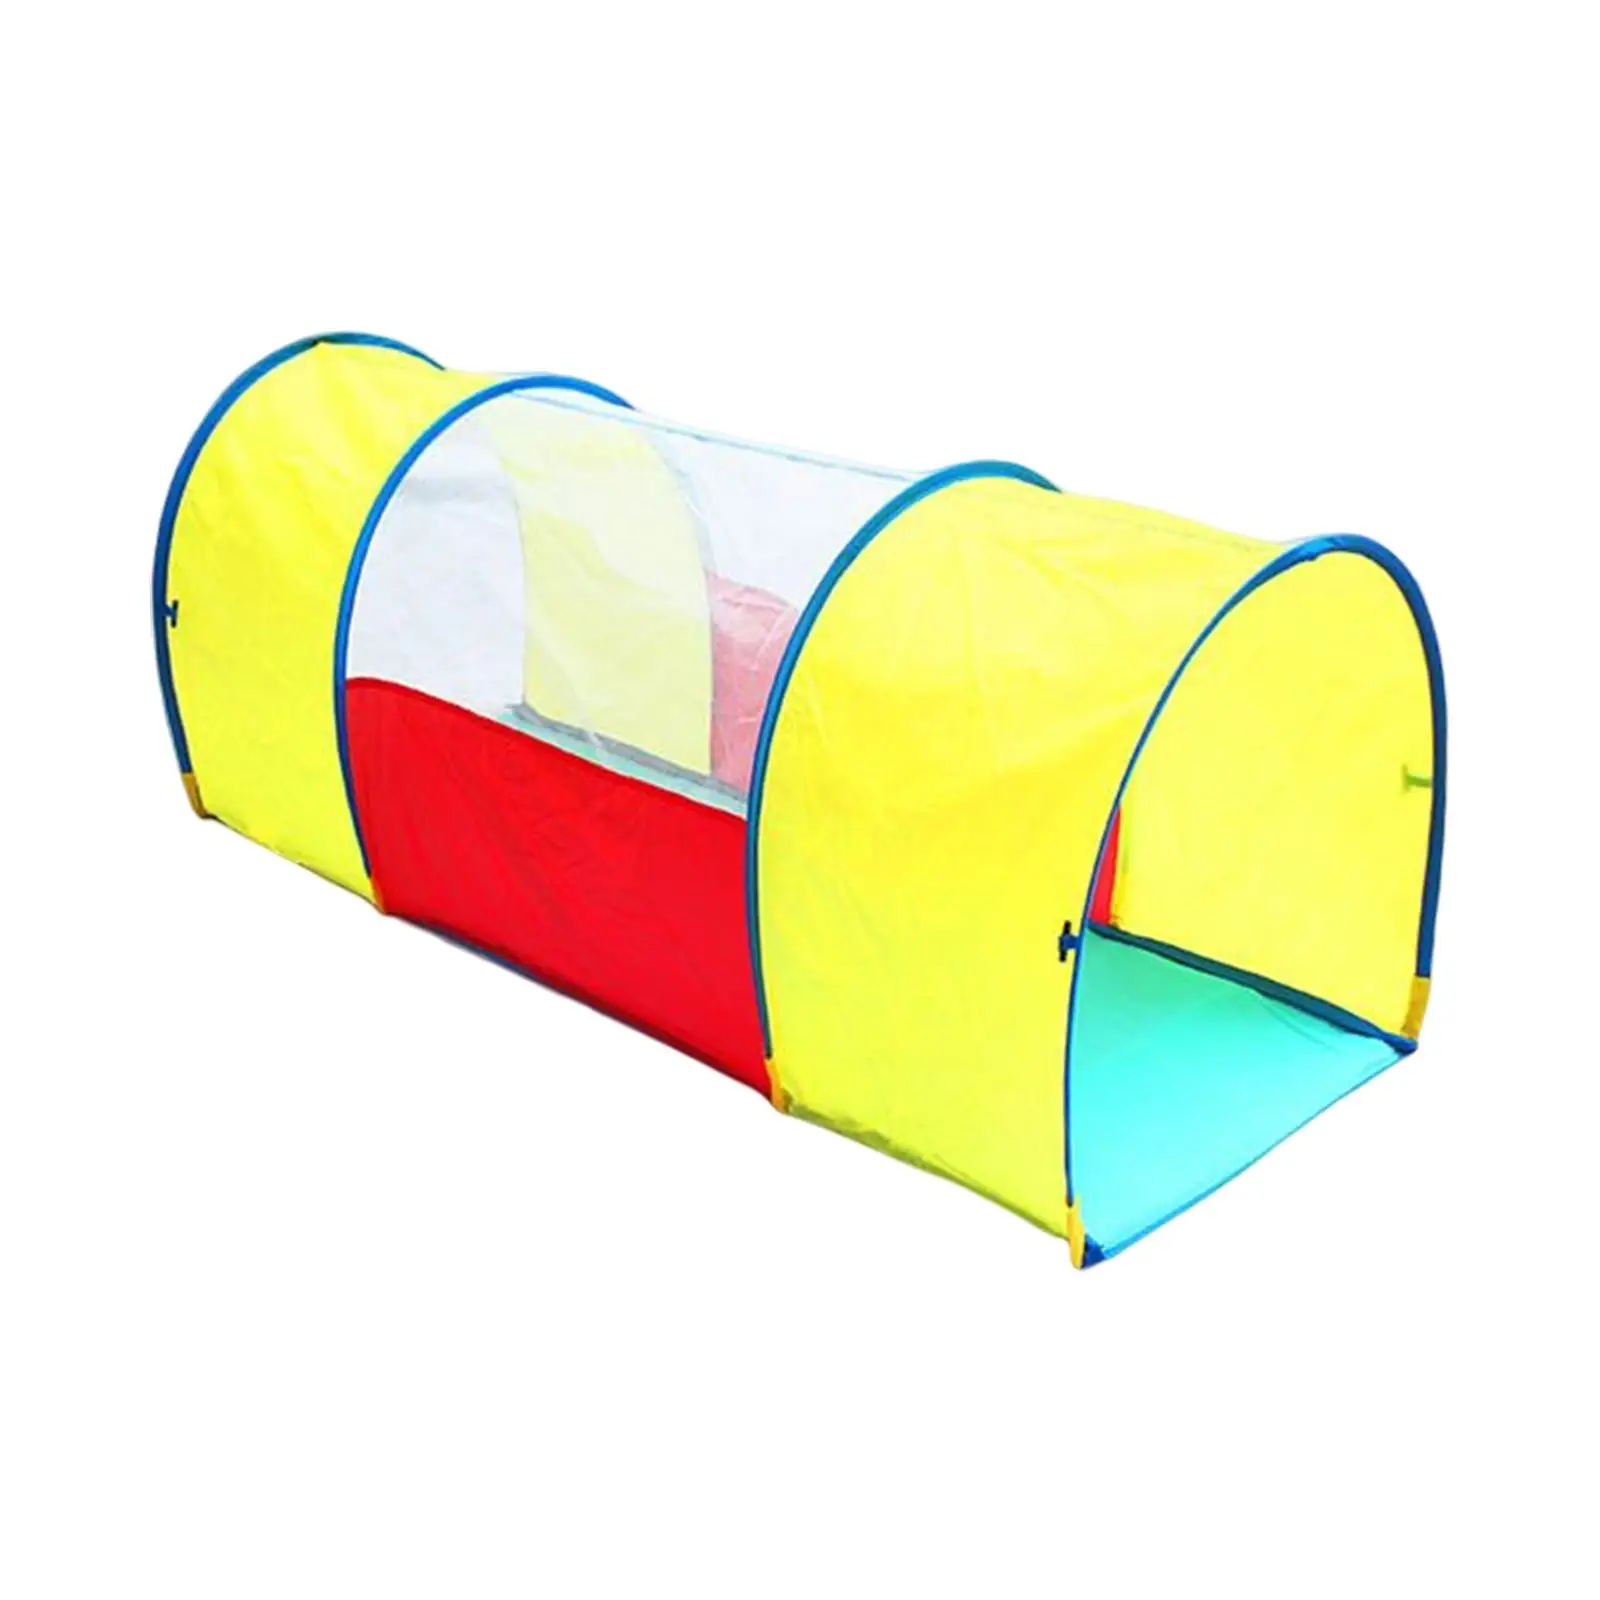 Breathable Play Tent Toy Indoor Outdoor Game Collapsible Tunnel for Toddlers